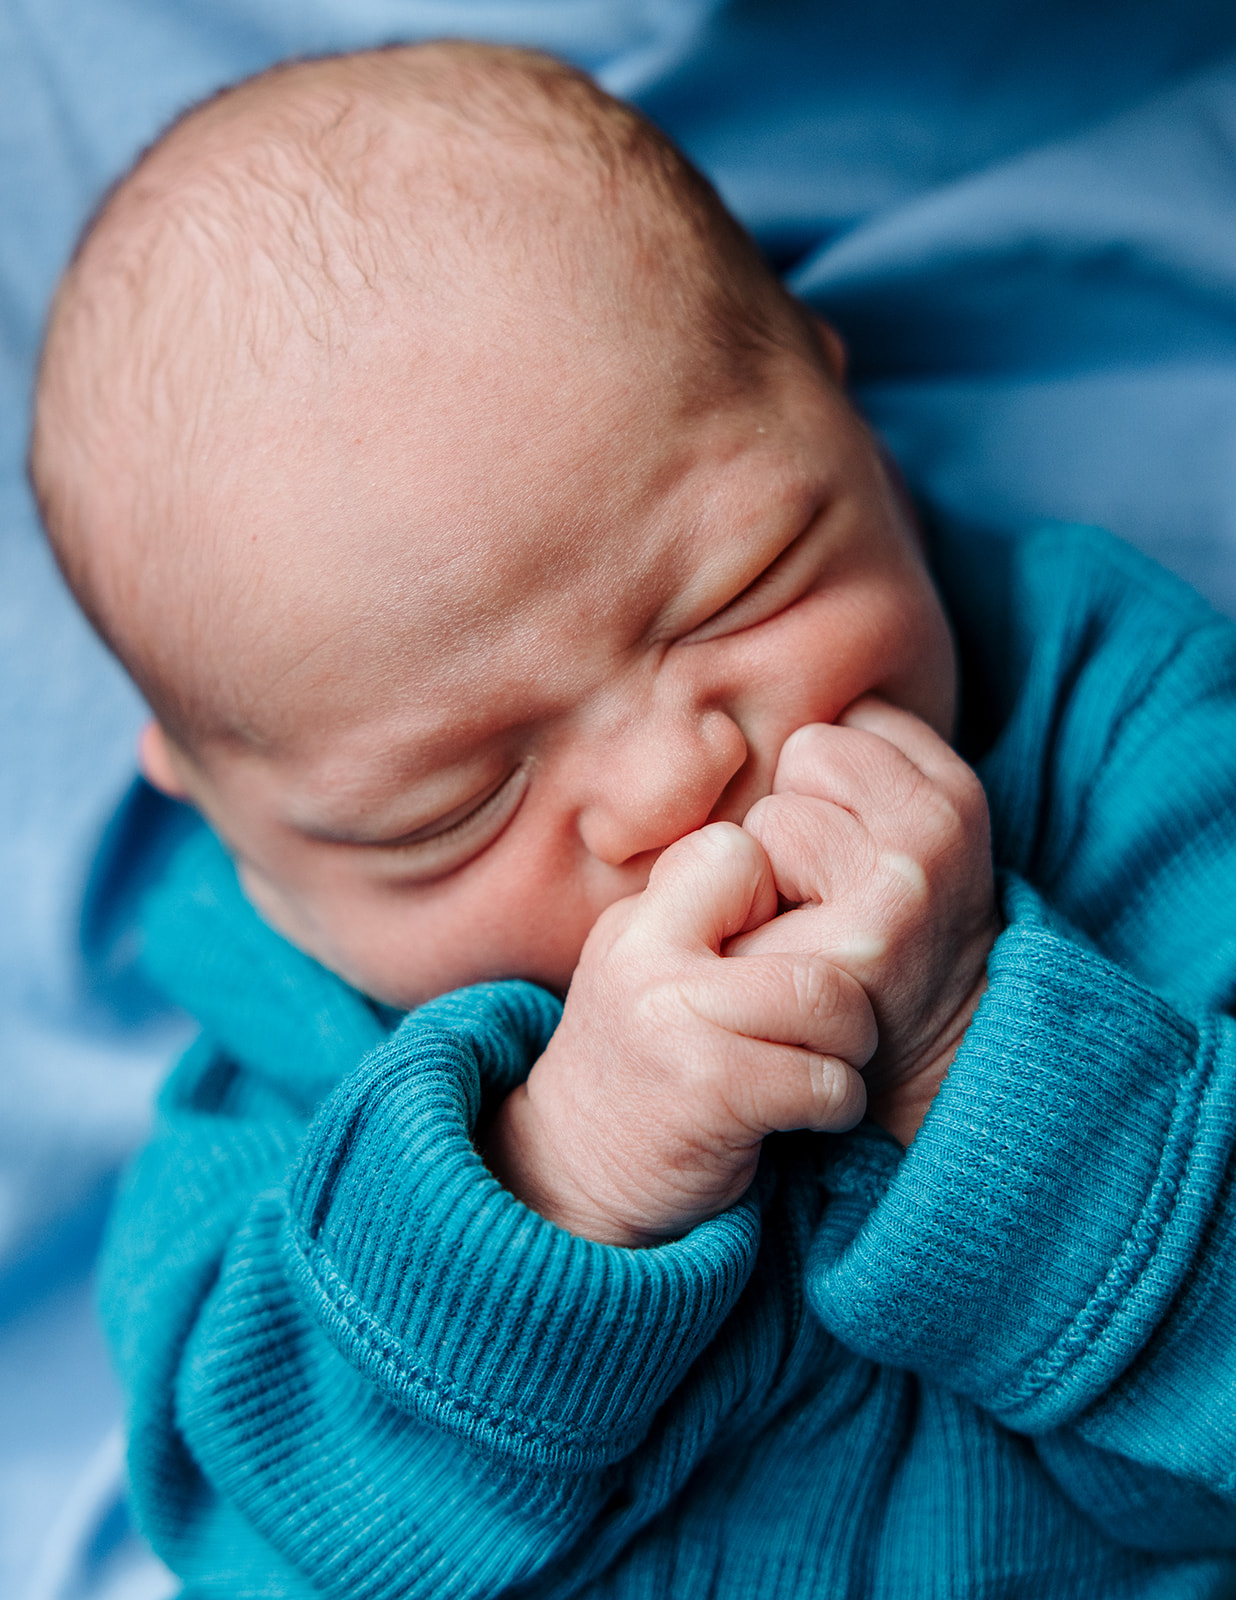 tight photo of newborn baby boy squishing his fists to his mouth